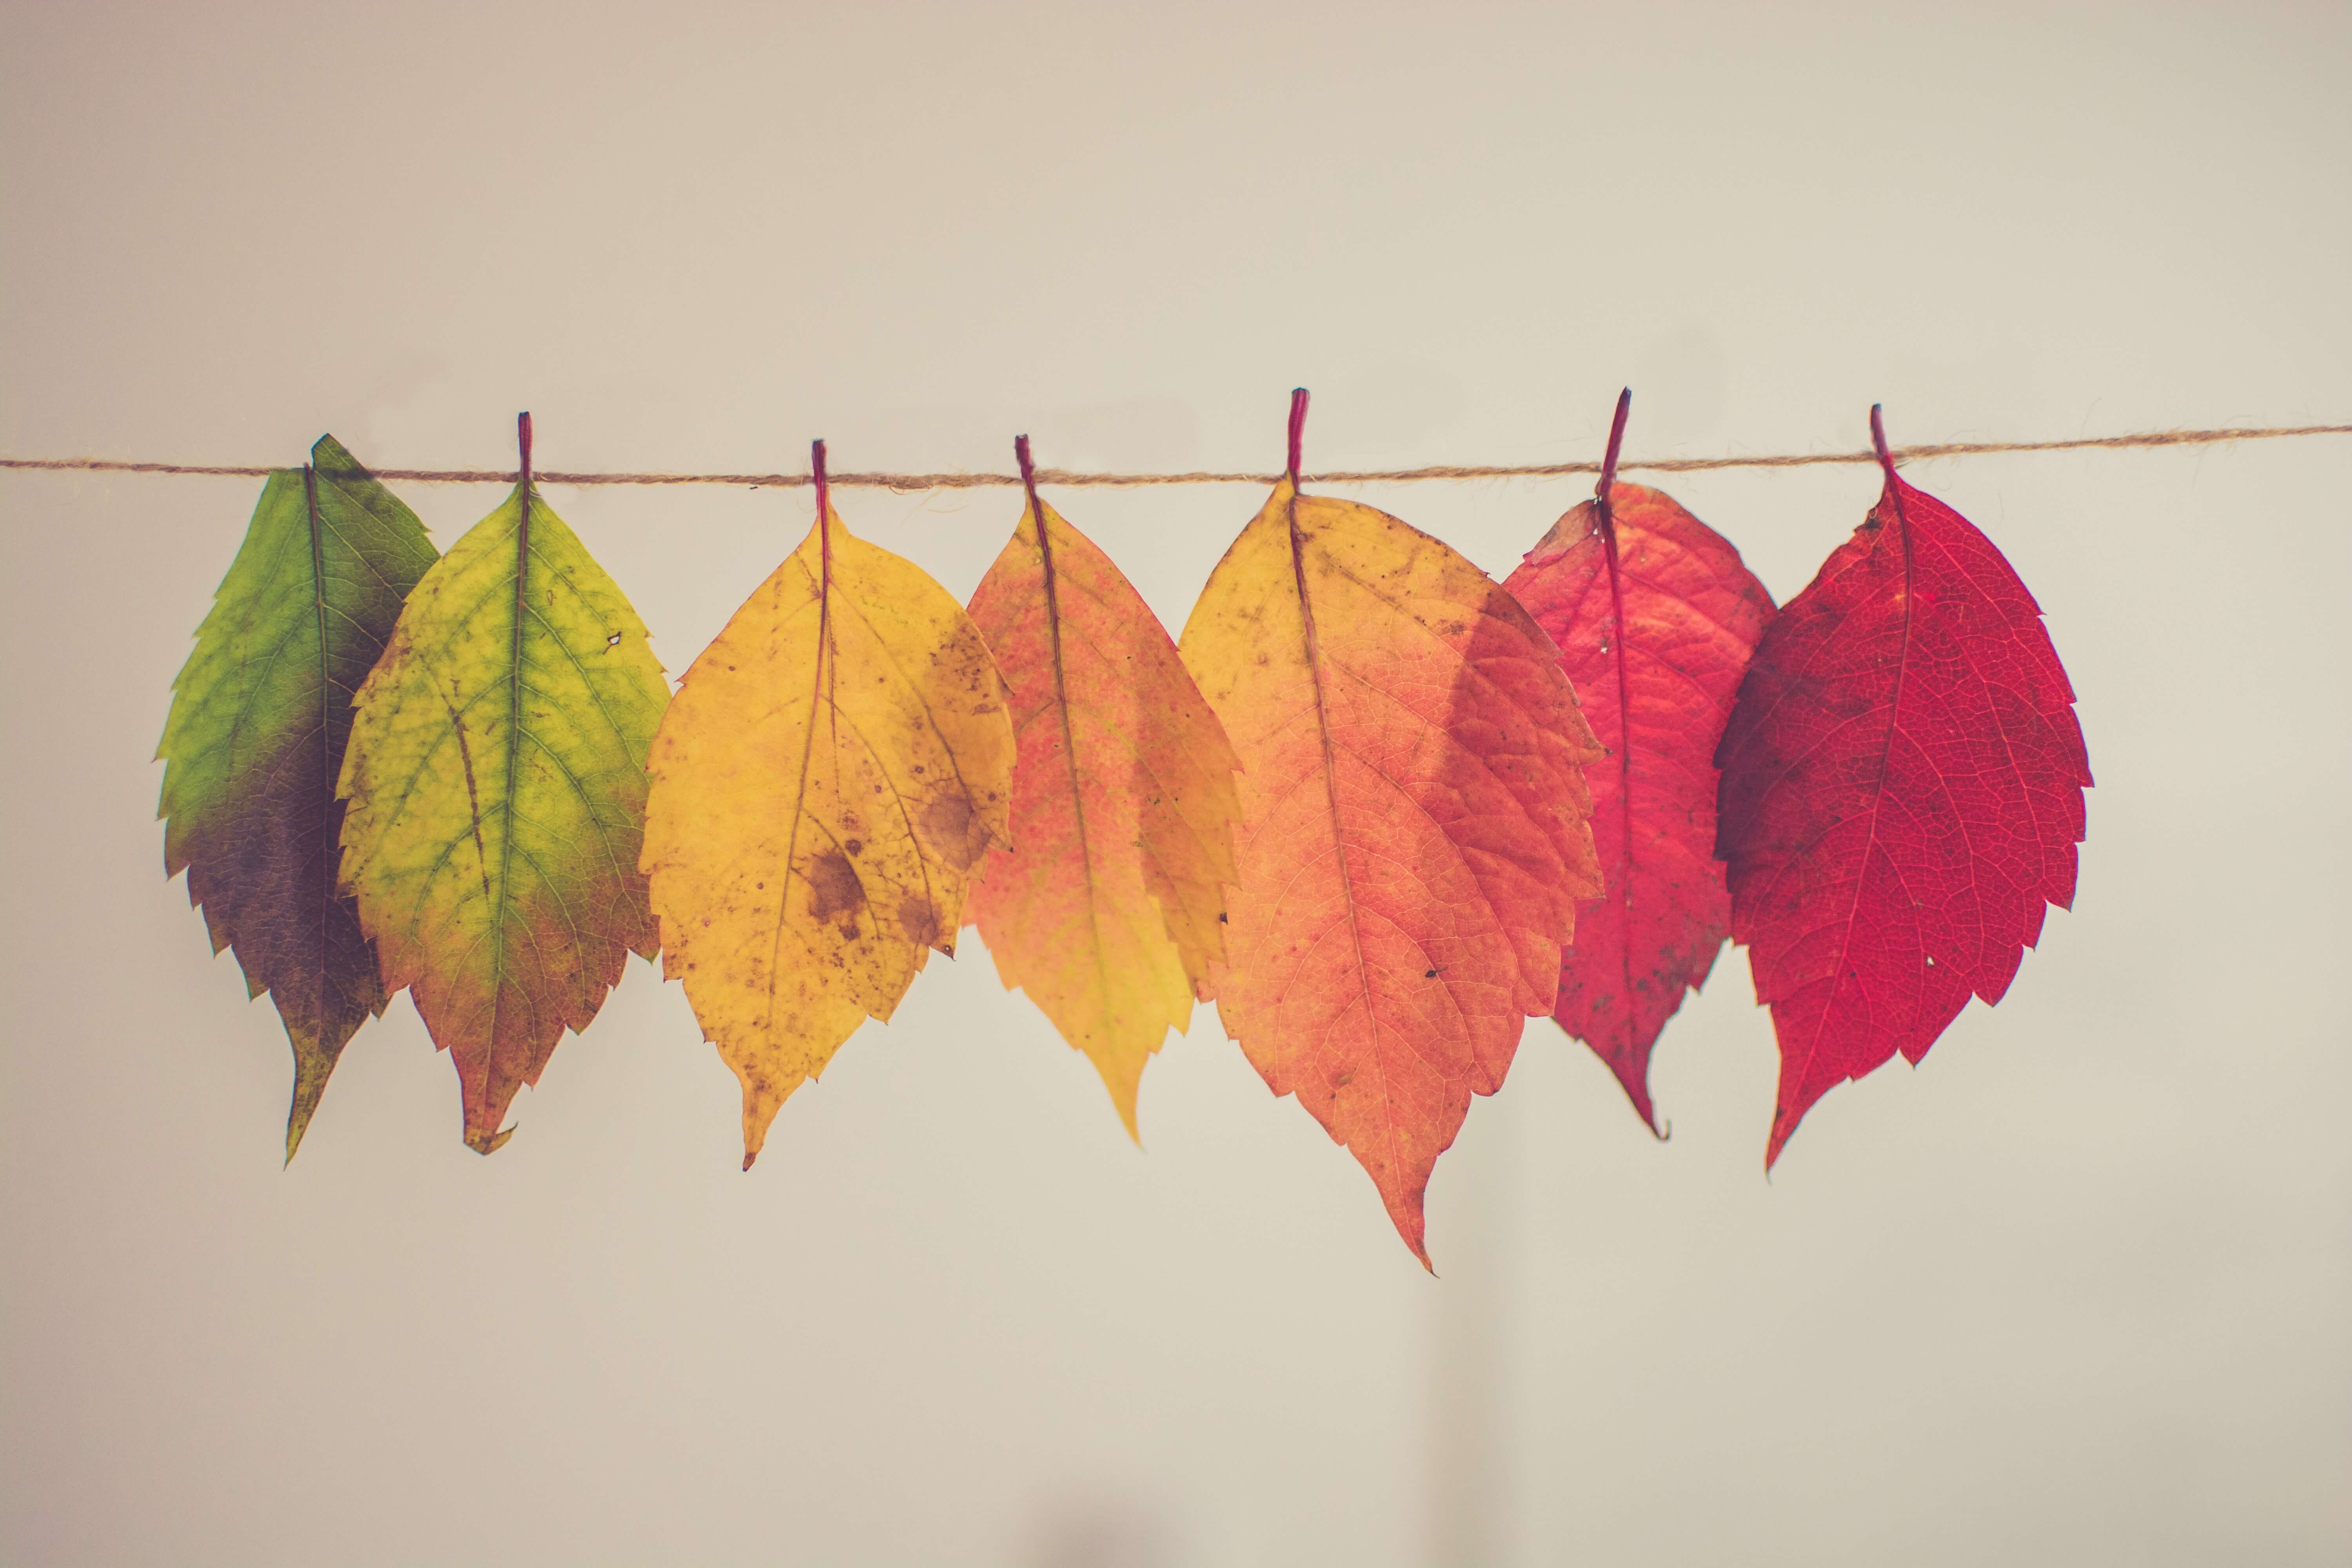 Seven leaves arranged on a gradient from green to deep red on a clothesline